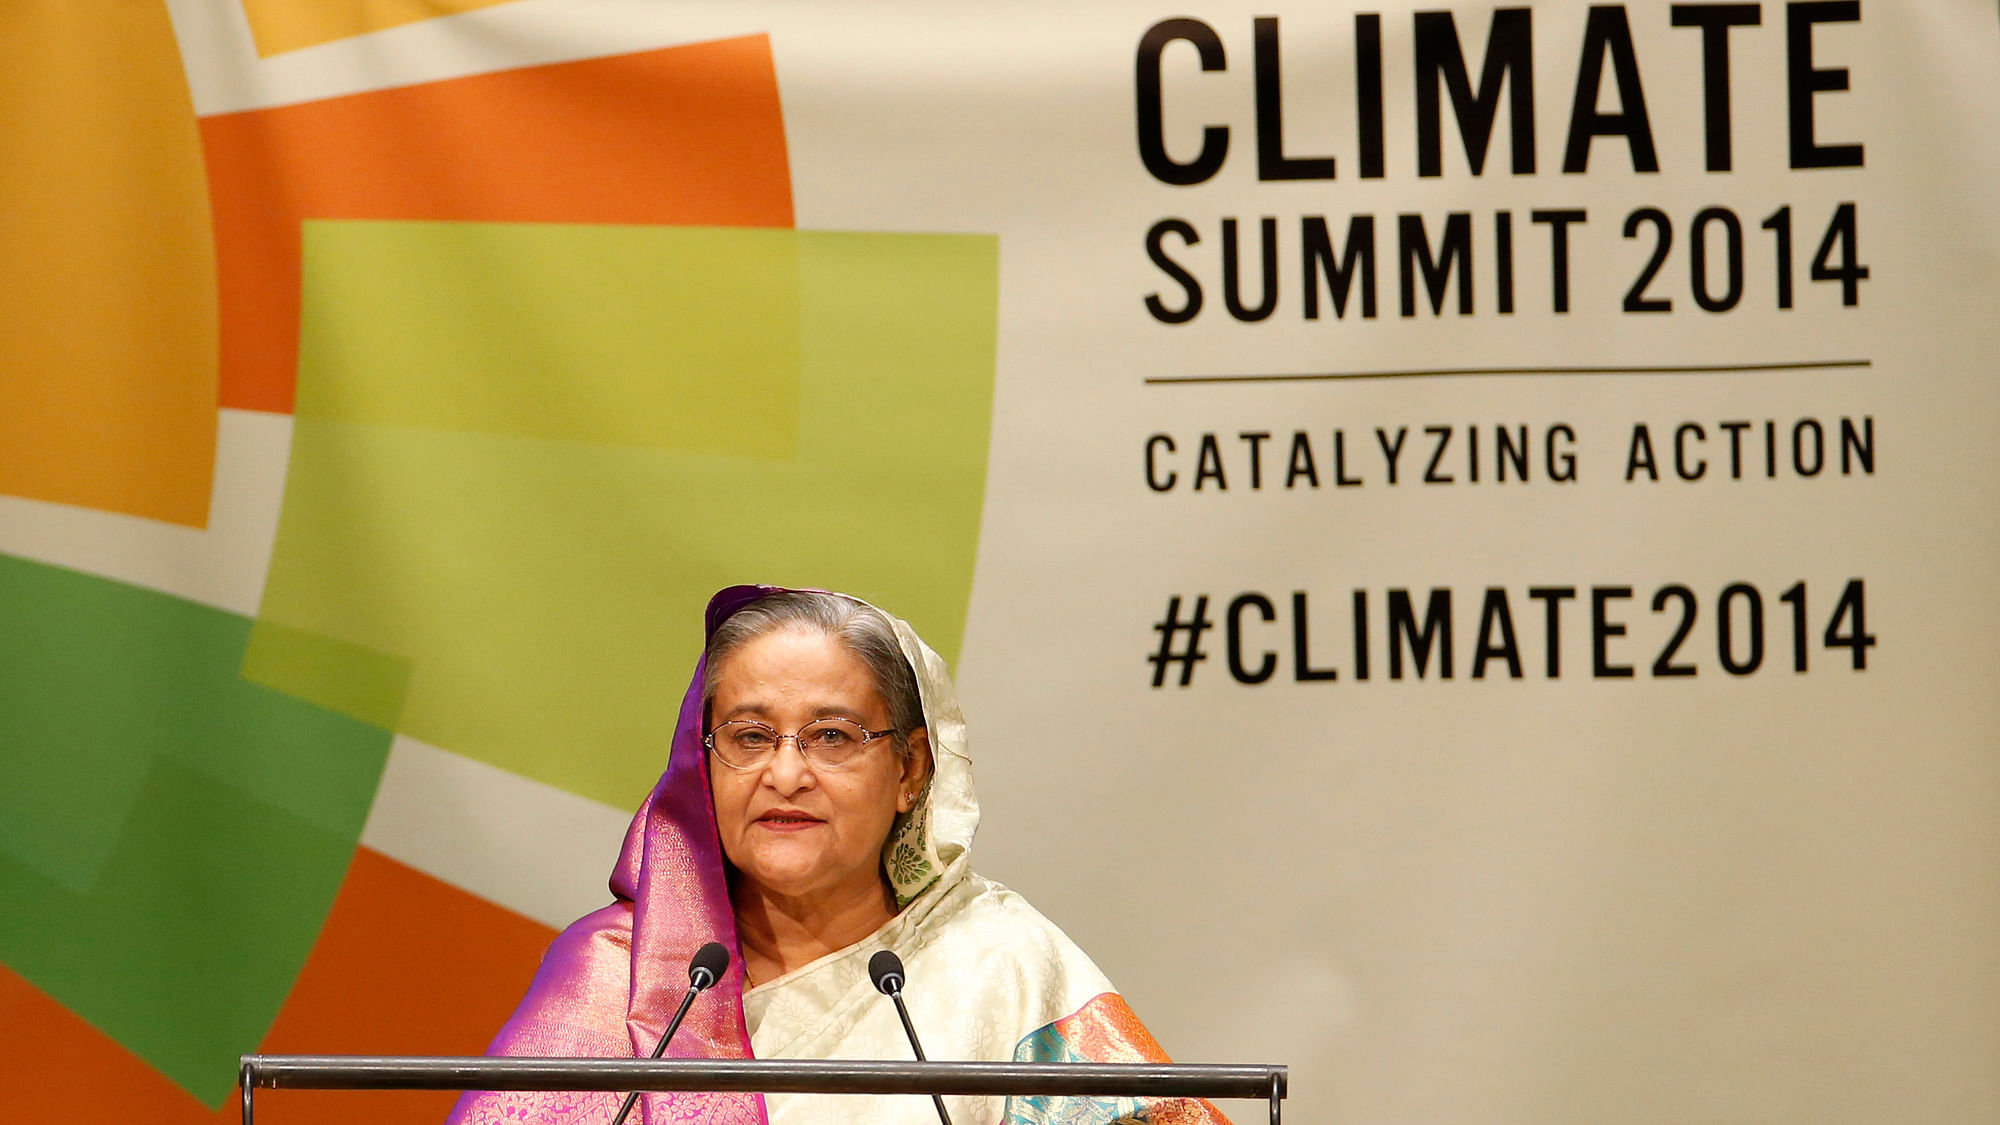 Bangladesh’s Prime Minister Sheikh Hasina speaks during the Climate Summit at the UN headquarters in New York, September 23, 2014. (Photo: Reuters)